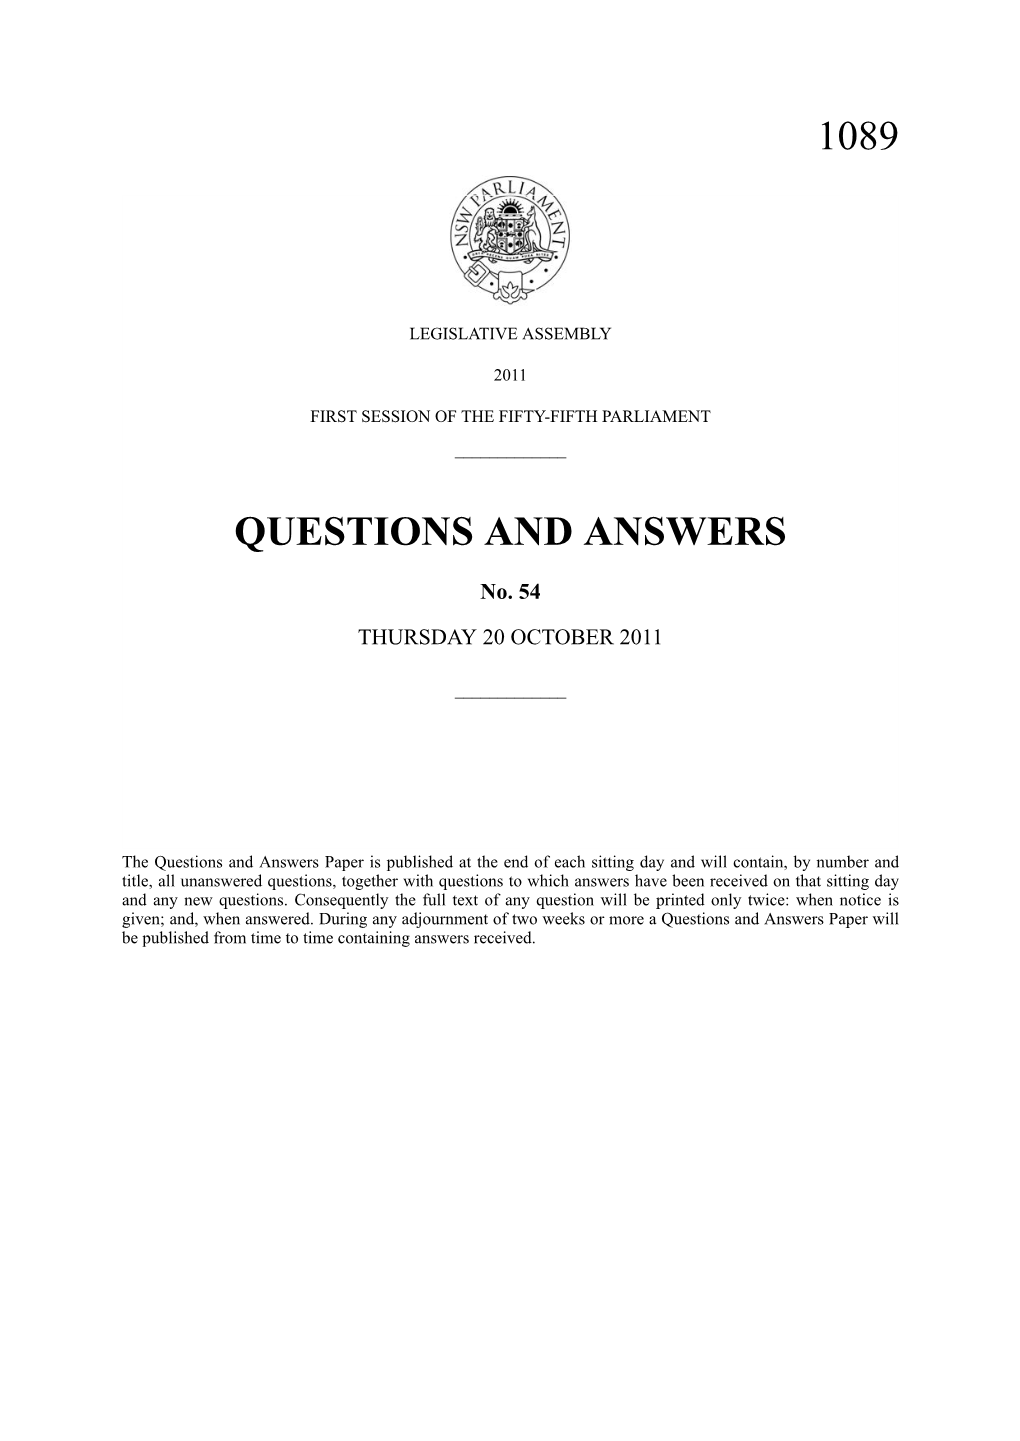 Questions & Answers Paper No. 54